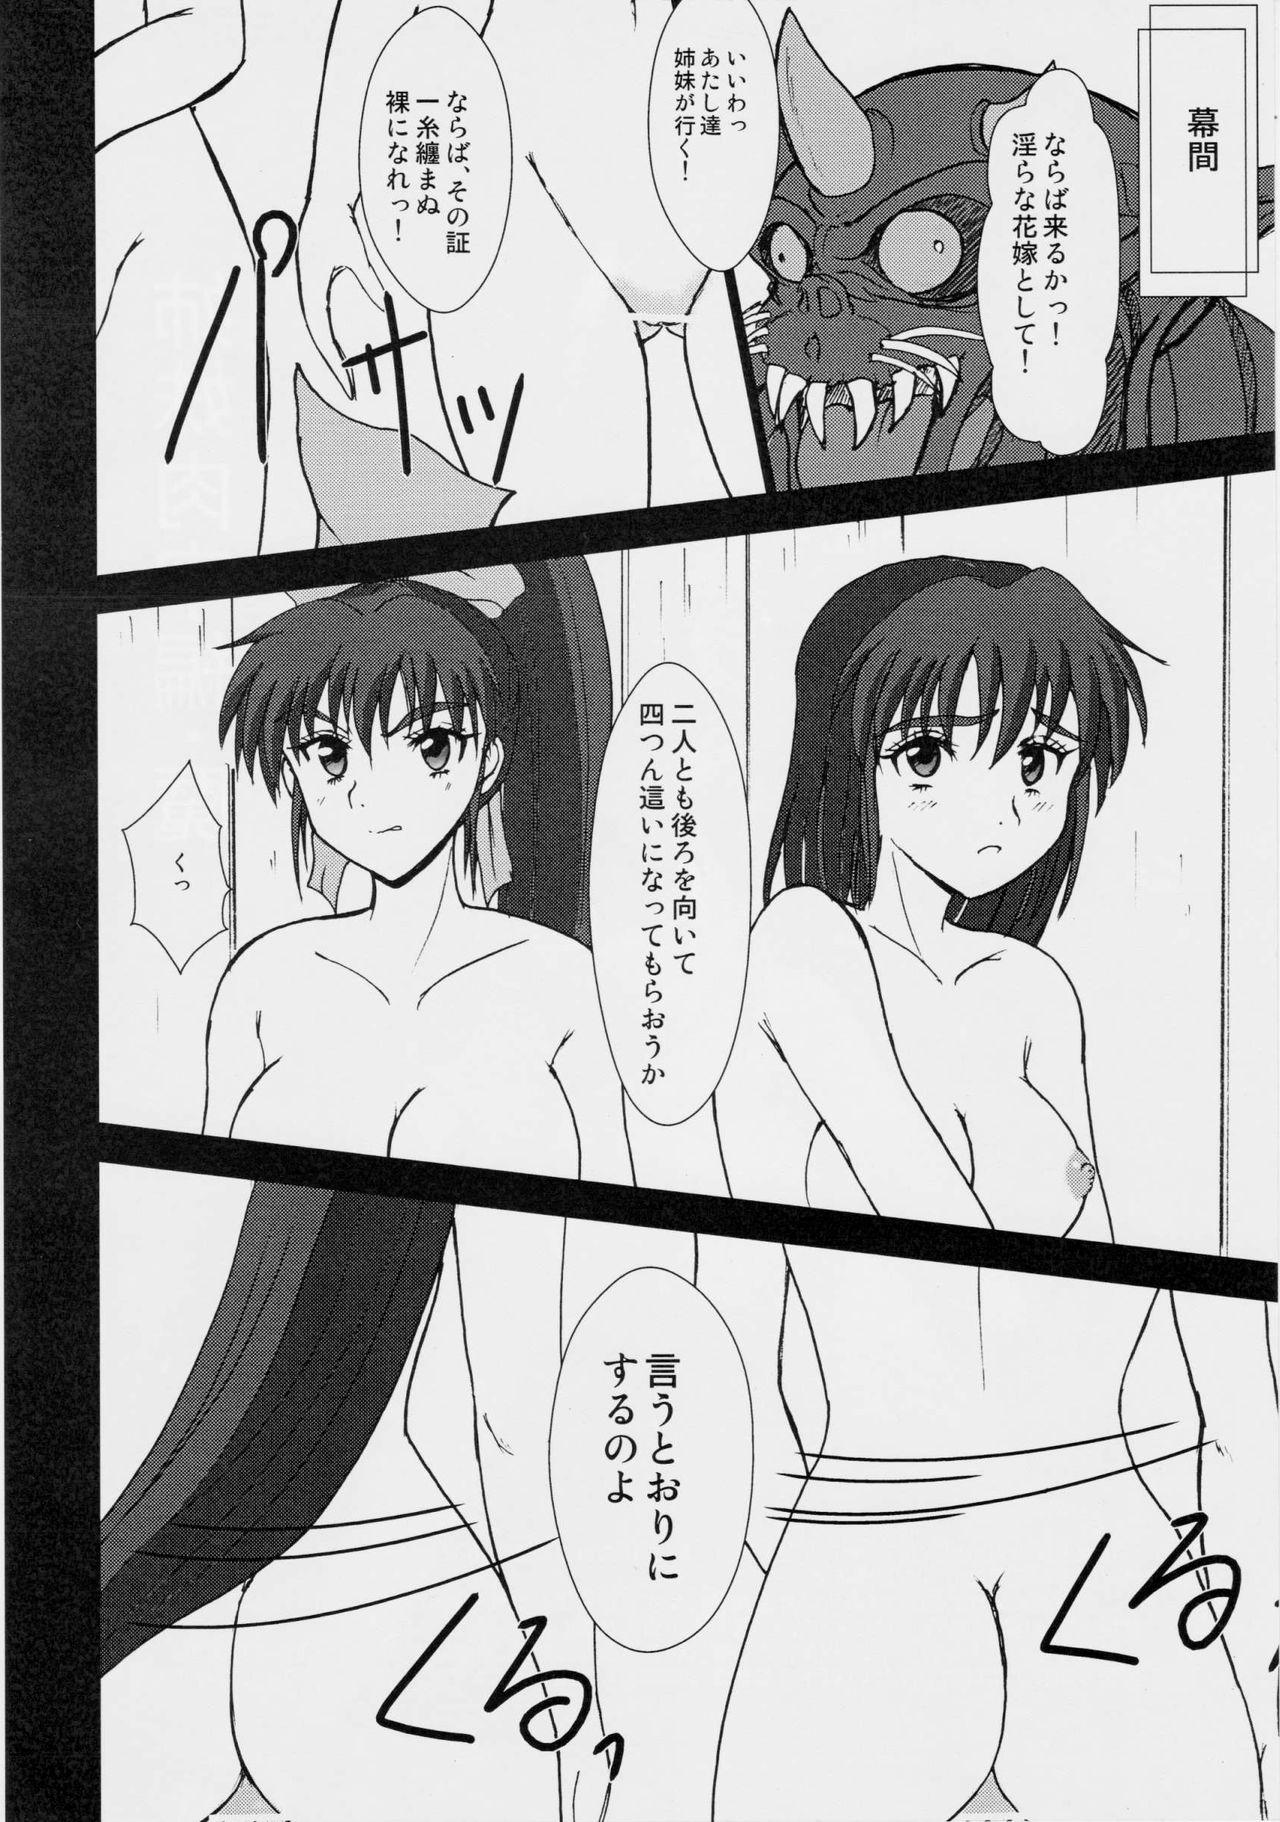 Indoor 謎の赤猫団 6 淫獣大聖戦 勒 Twin Angel War 姉妹肉牢編・魔 - Twin angels Doggy Style - Page 7